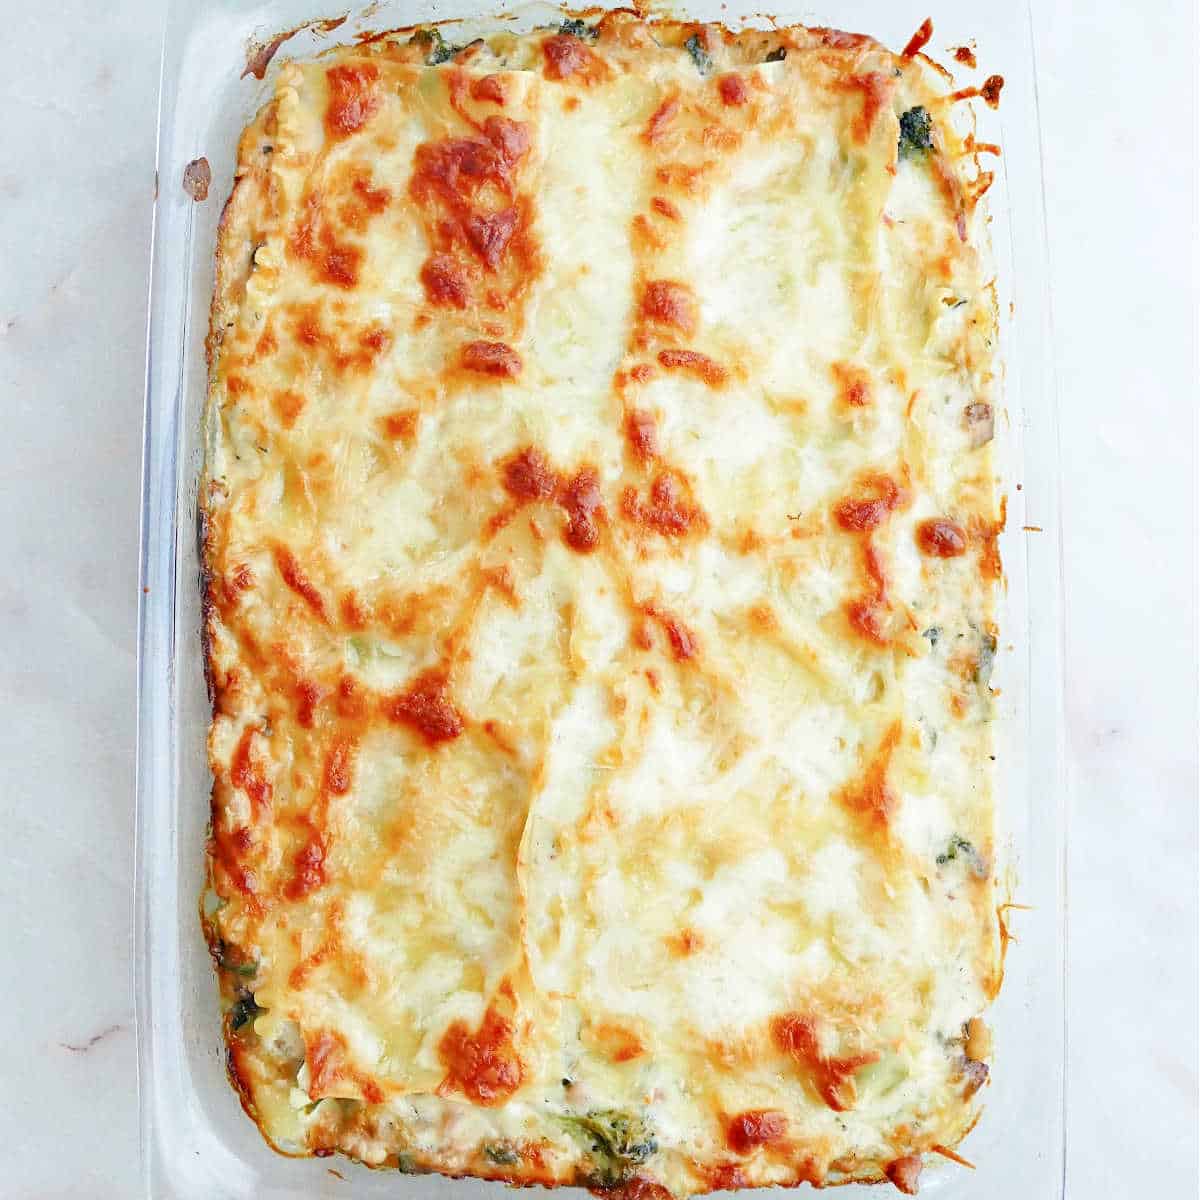 vegetable lasagna with white sauce after coming out of the oven